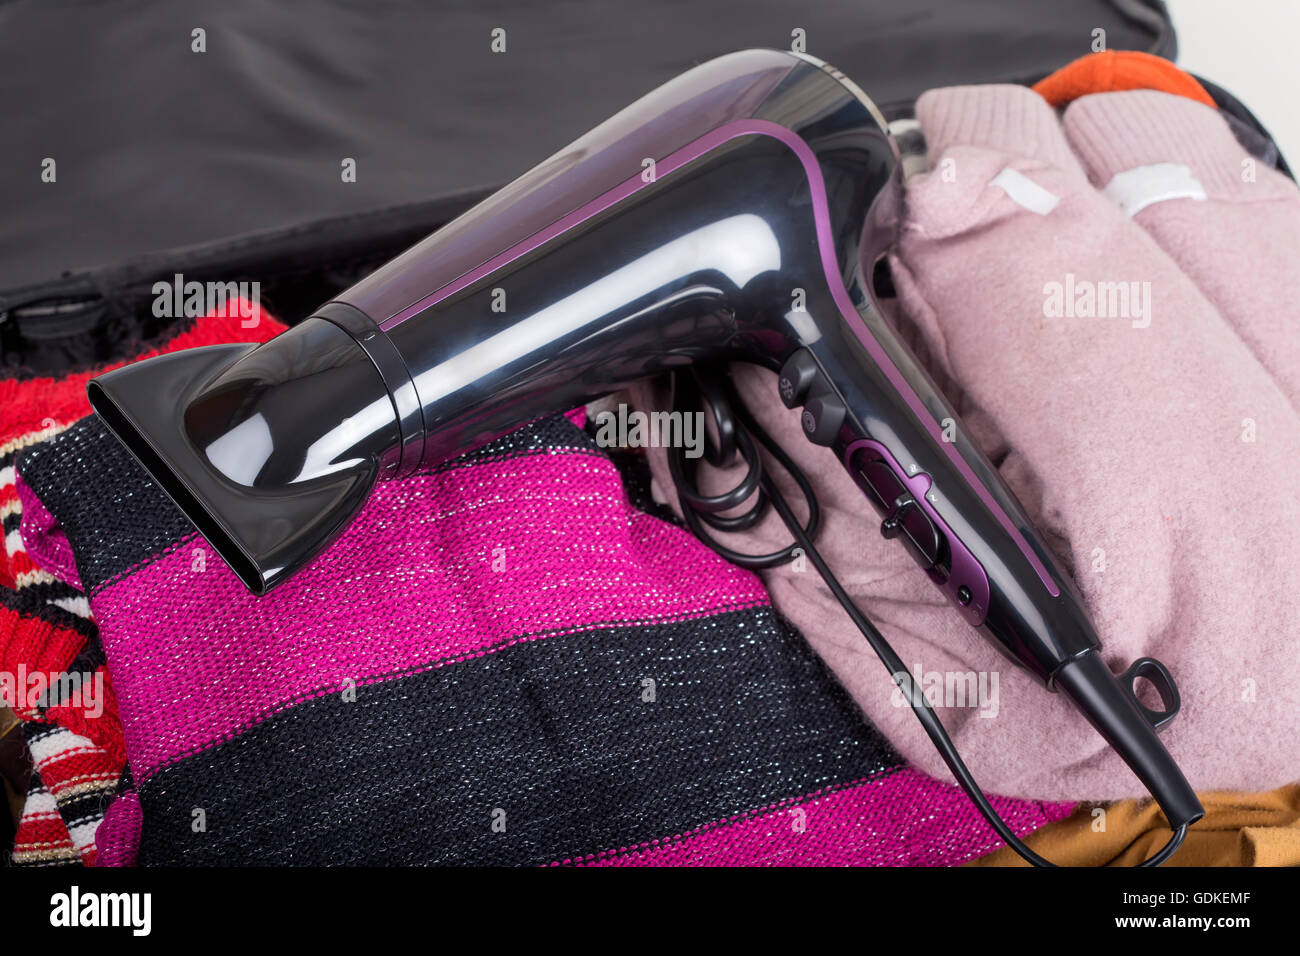 Modern hair dryer on travel bag with clothes Stock Photo